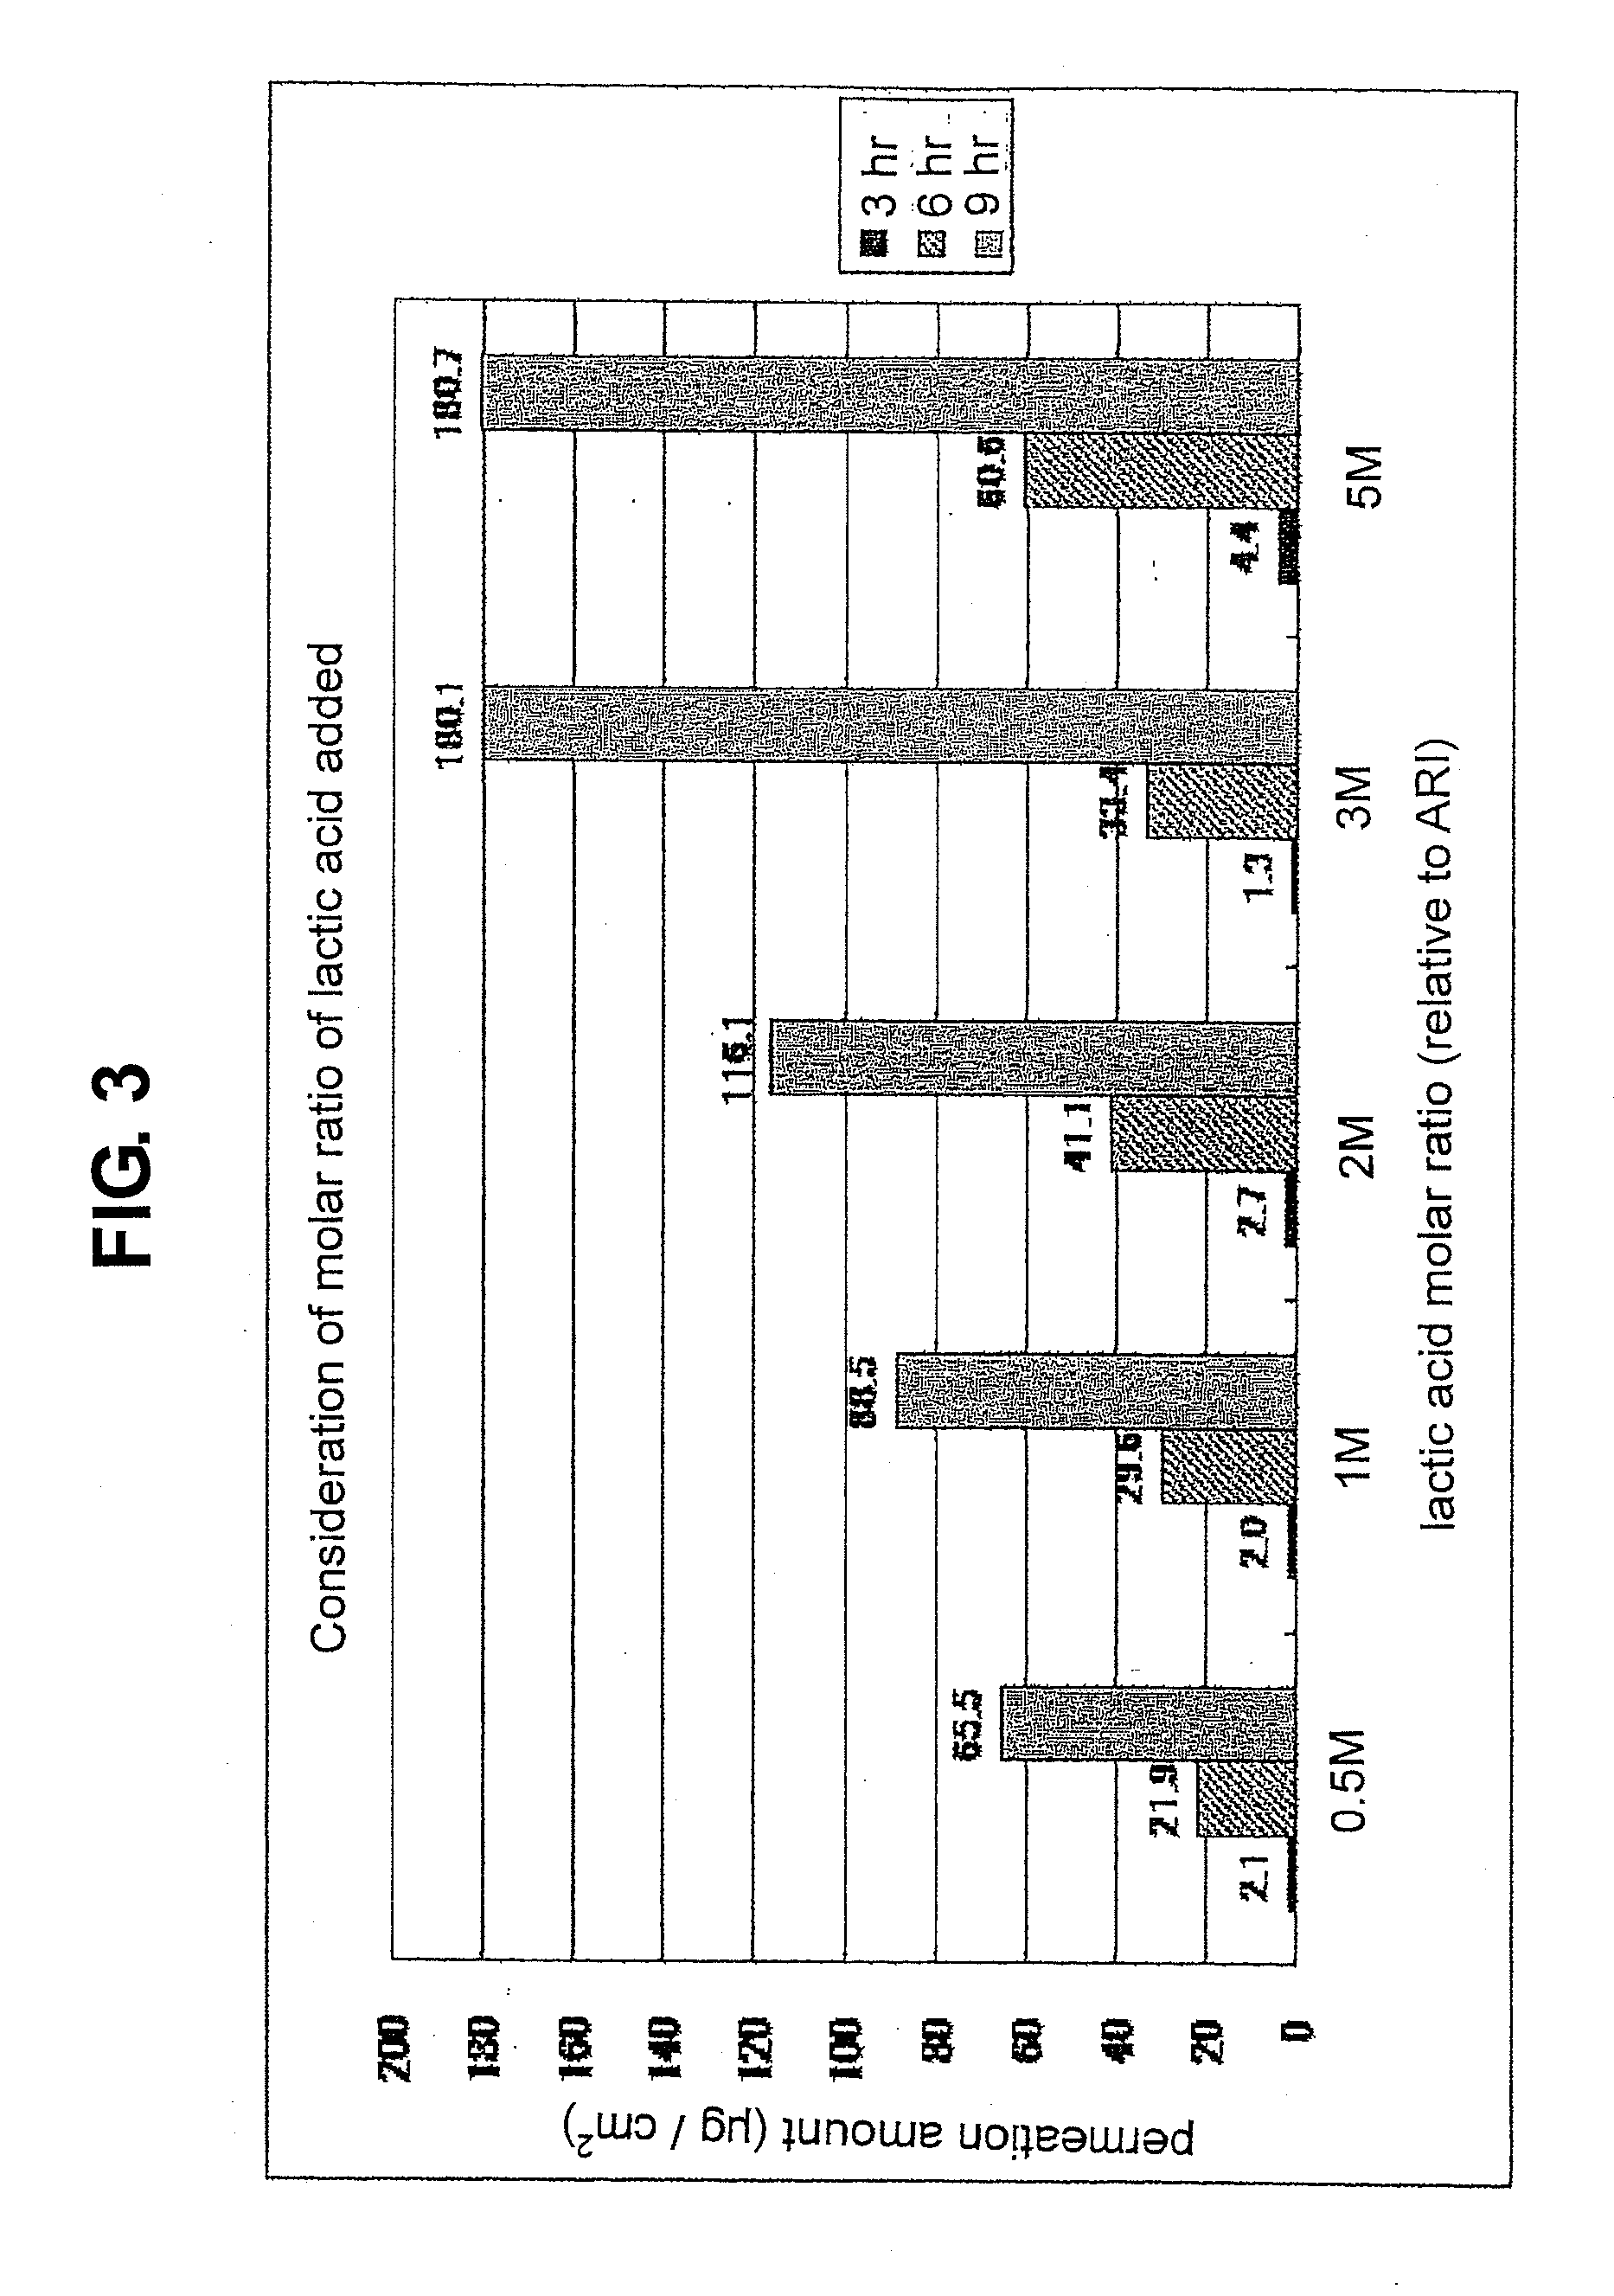 Composition for external application comprising aripiprazole and organic acid as active ingredients